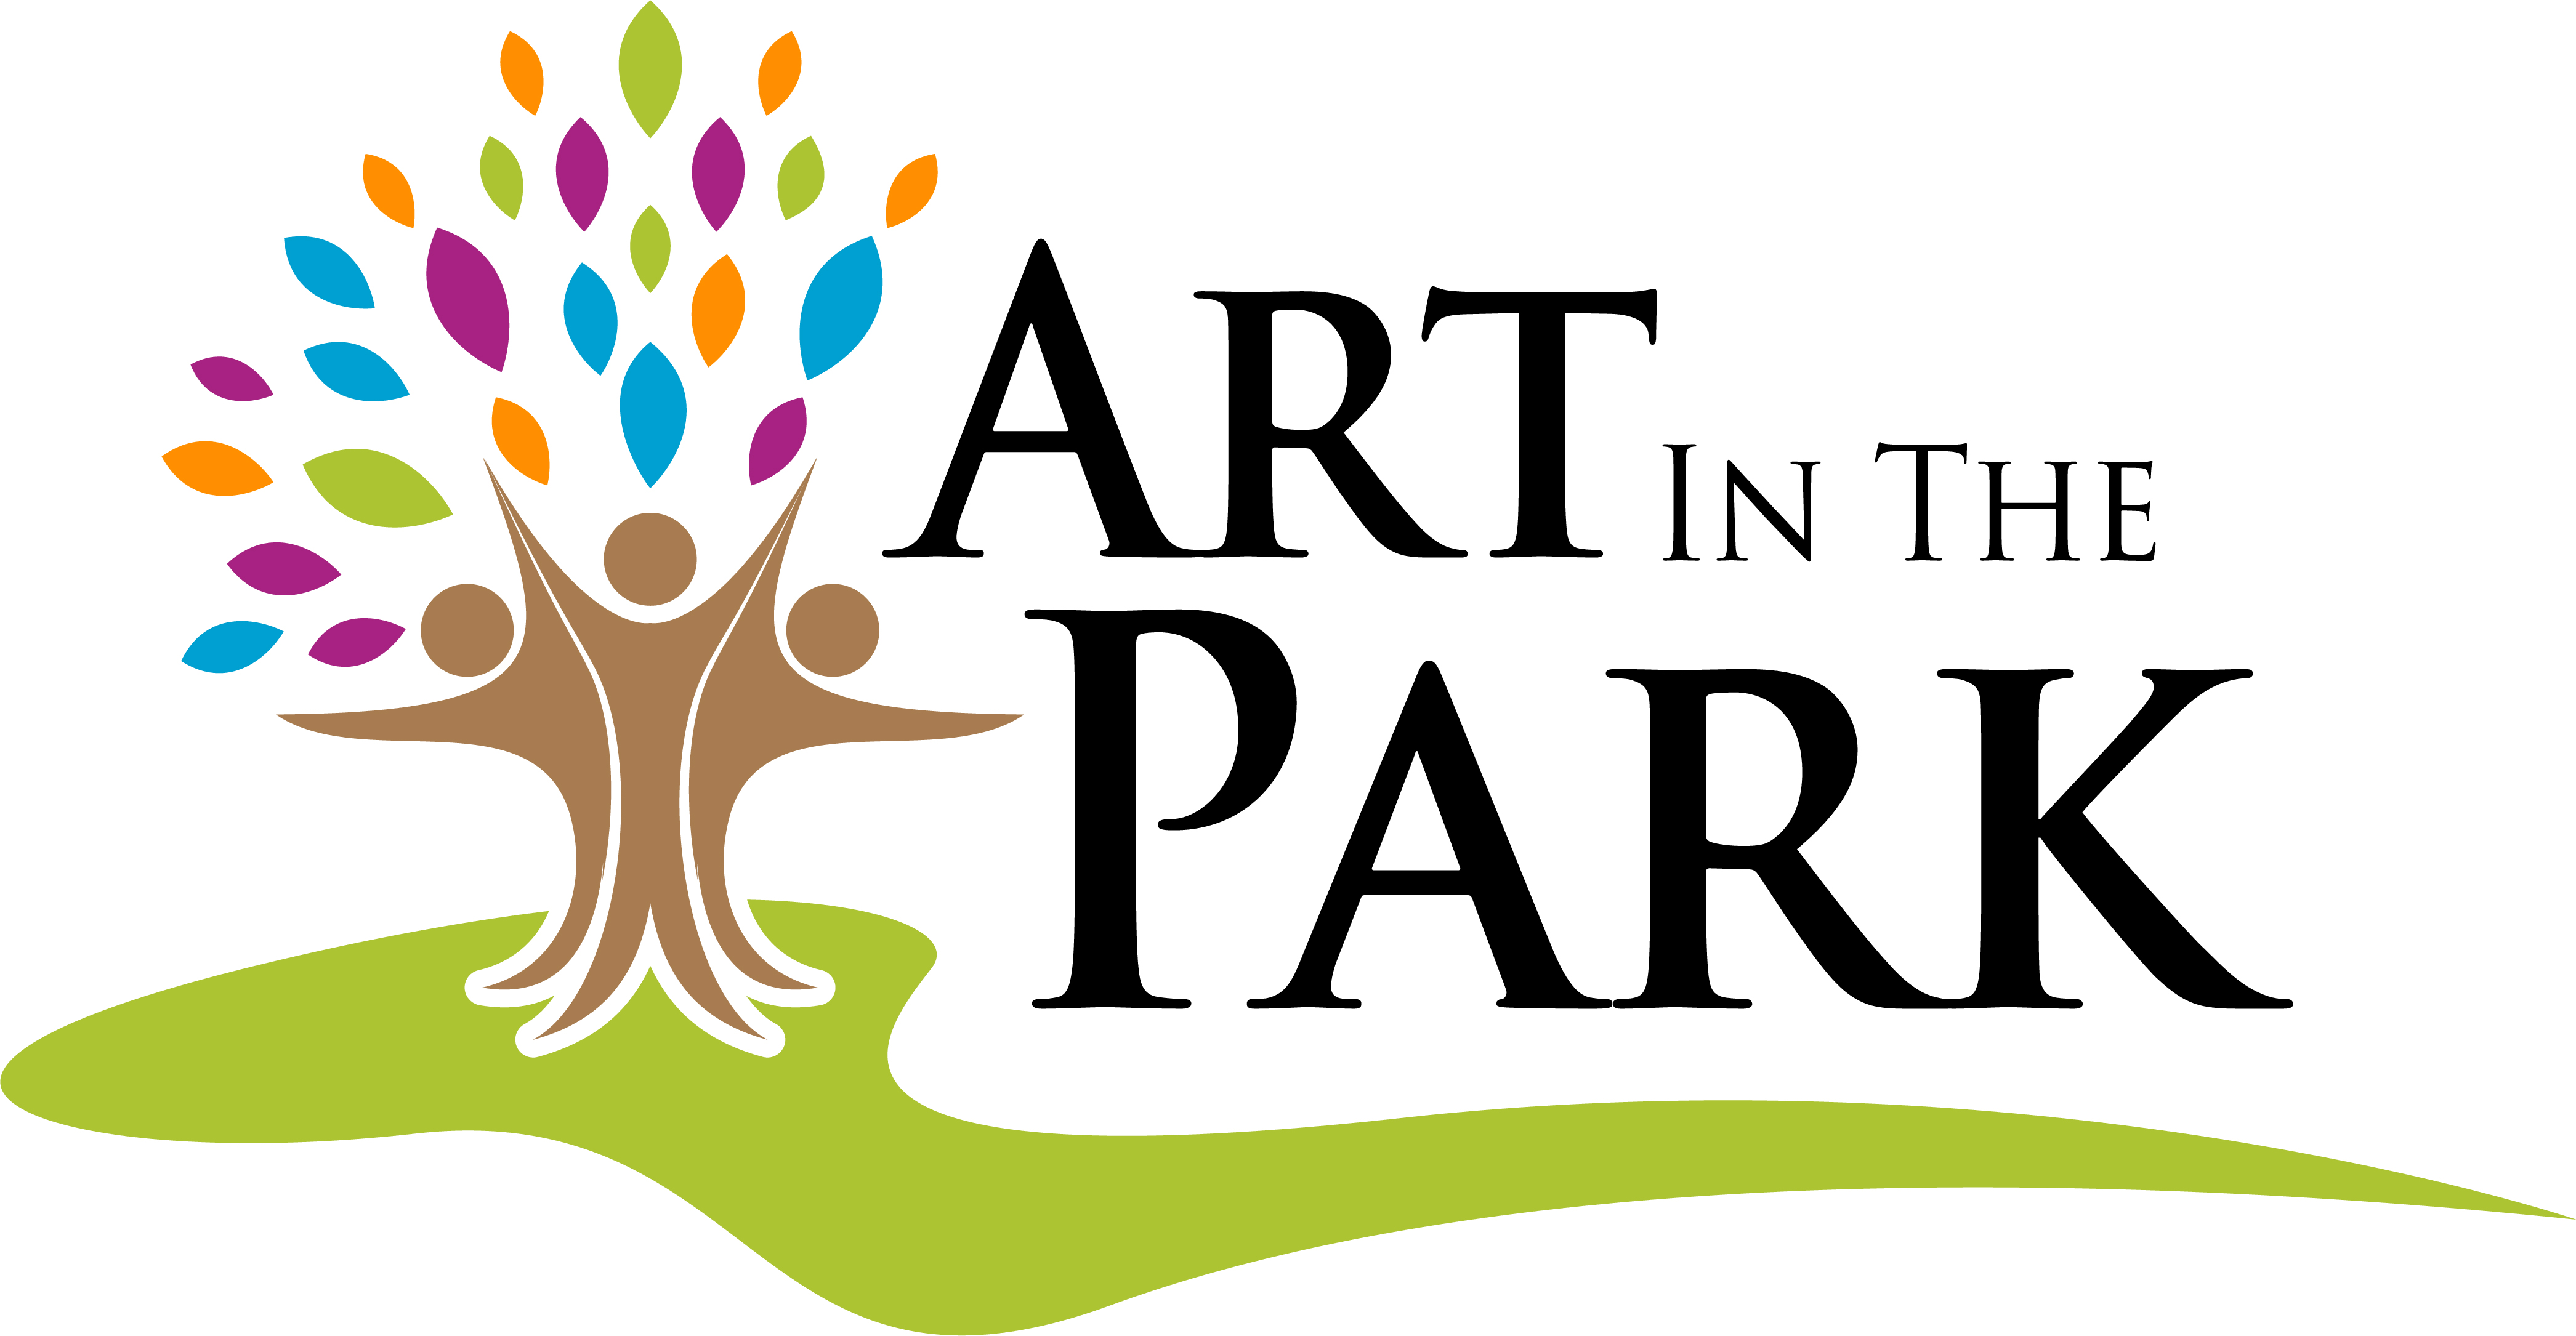 art in the park, New York, USA African Tourism Board